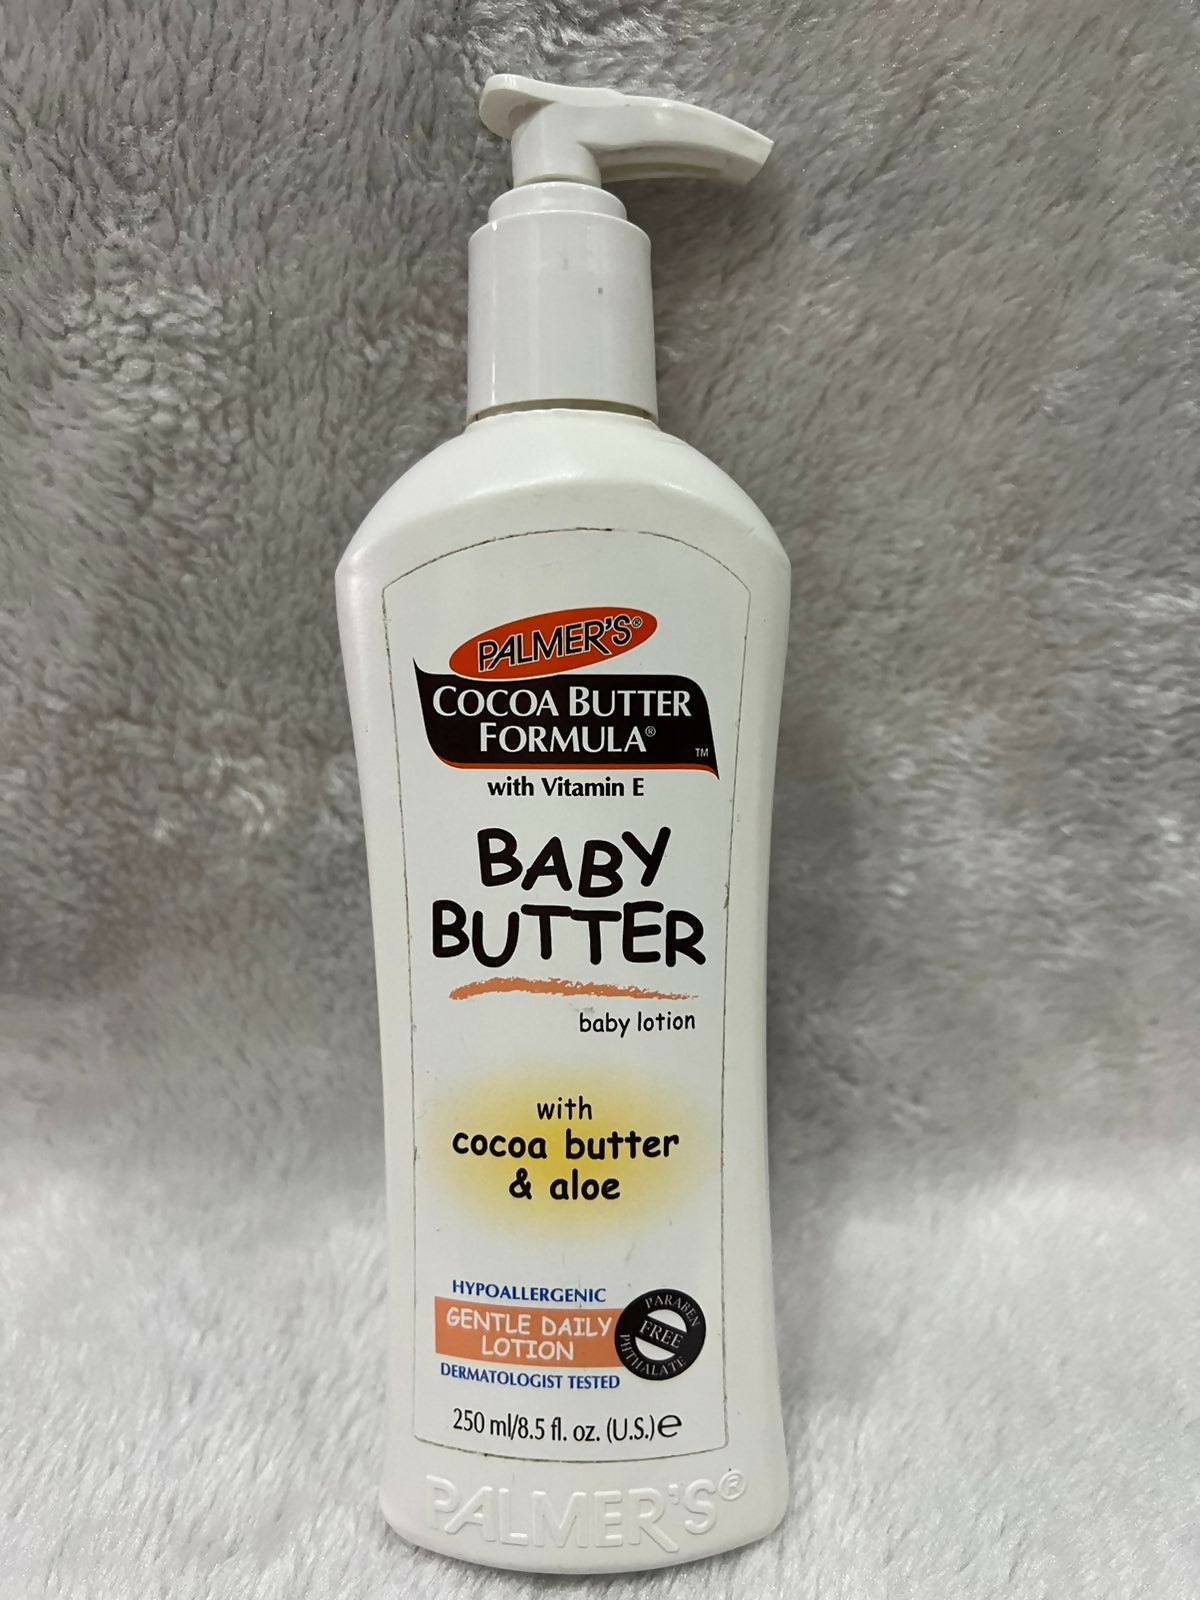 Palmers Cocoa Butter Formula Baby Butter Lotion 250ml